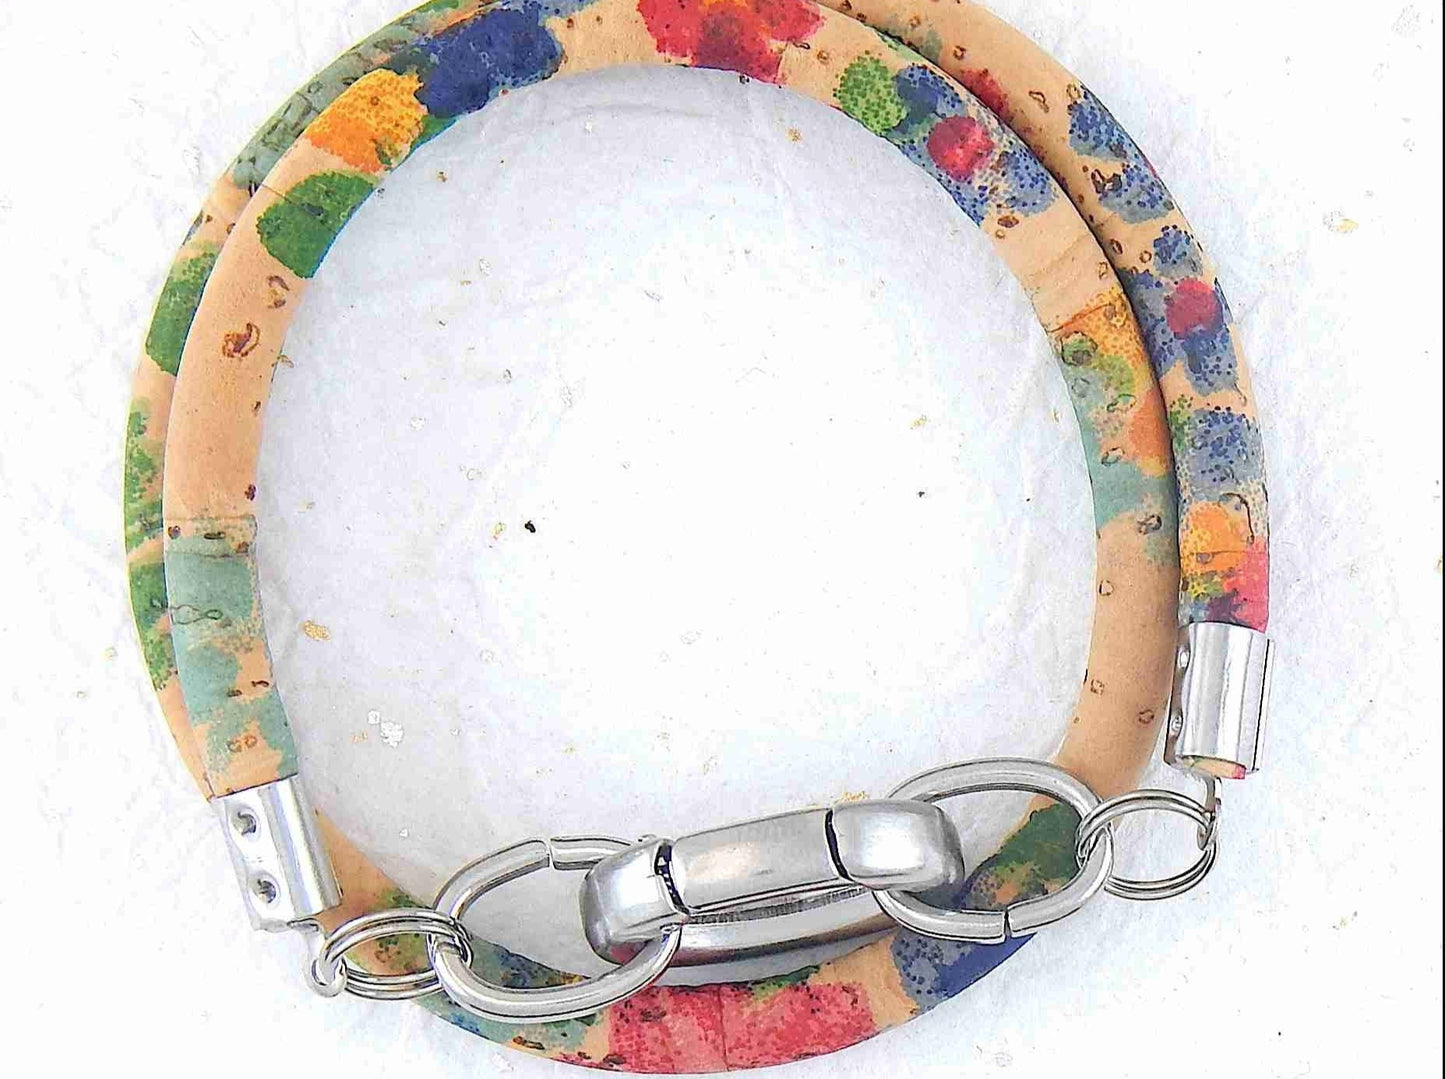 Double-row 6mm round cork bracelet with oval stainless steel clasp in 4 patterns (leopard, bright flowers, soft flowers, natural with silver speckles)